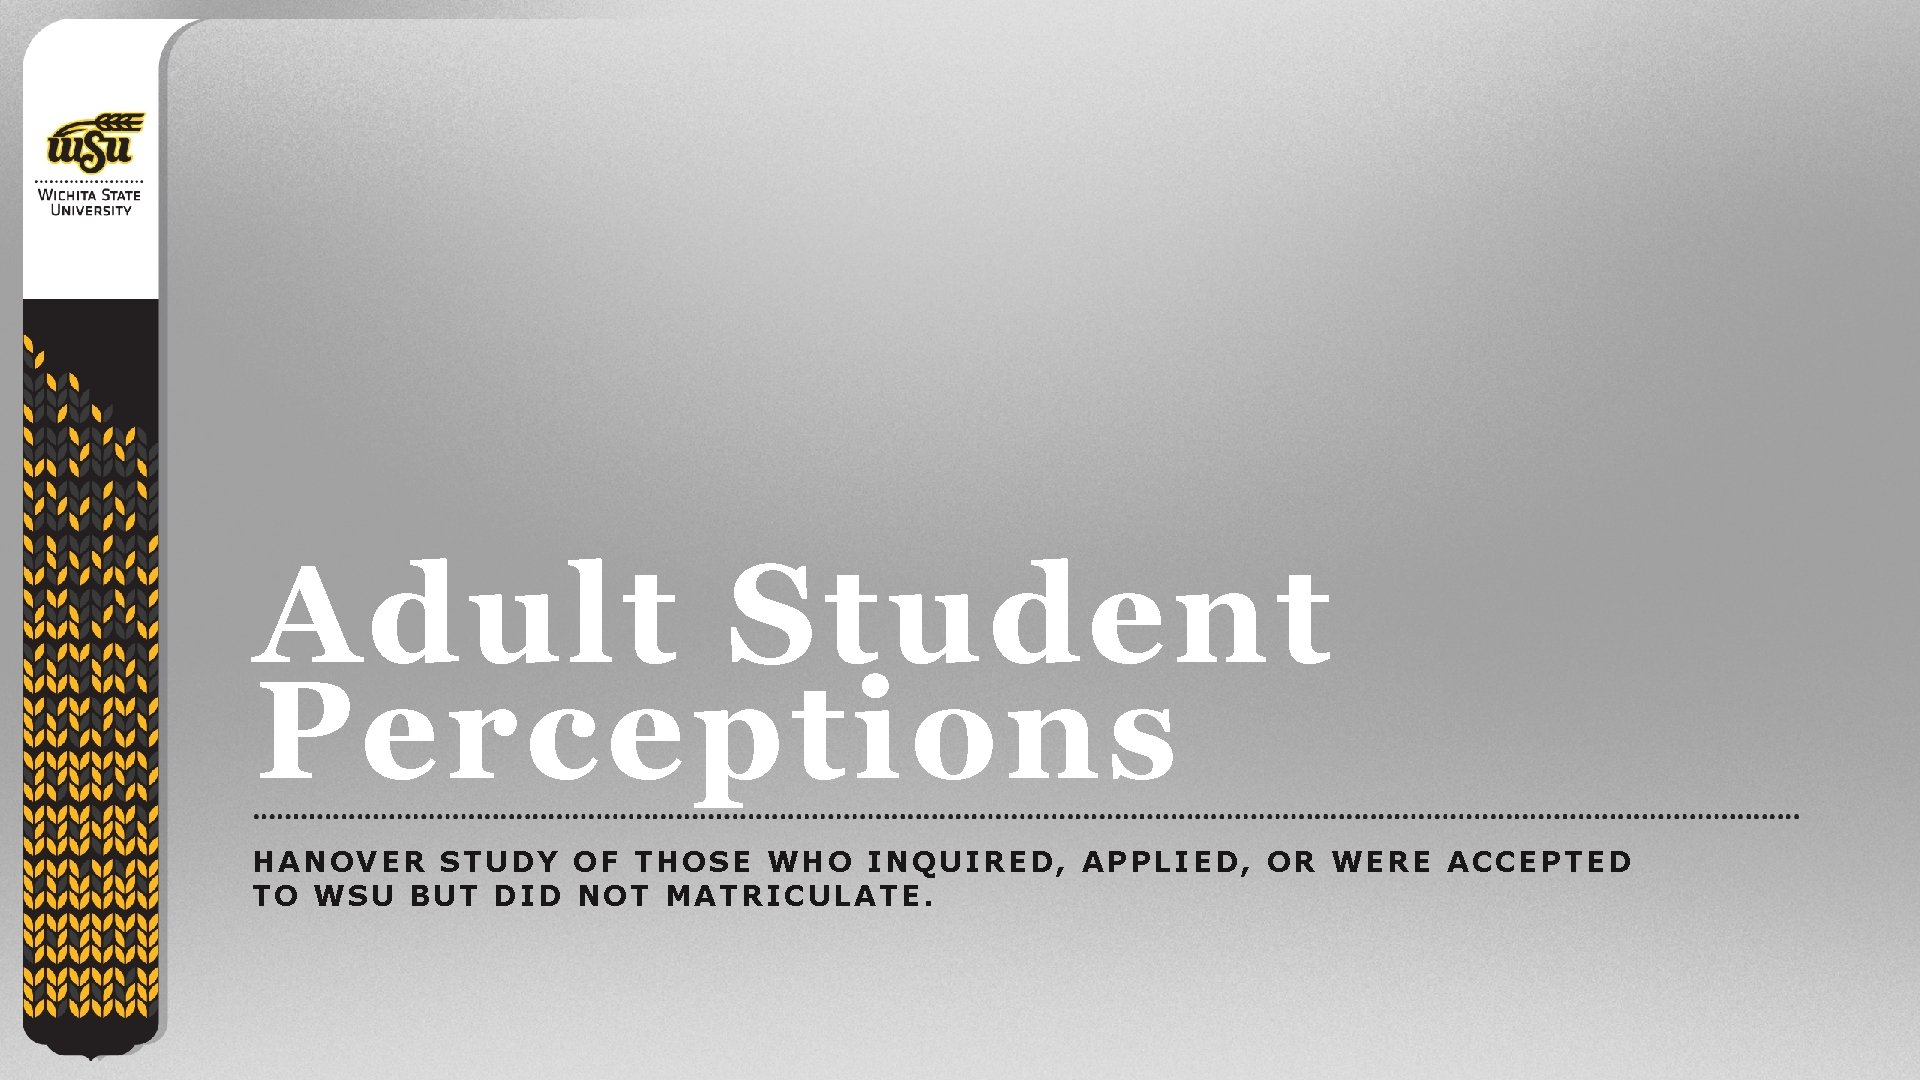 Adult Student Perceptions HANOVER STUDY OF THOSE WHO INQUIRED, APPLIED, OR WERE ACCEPTED TO